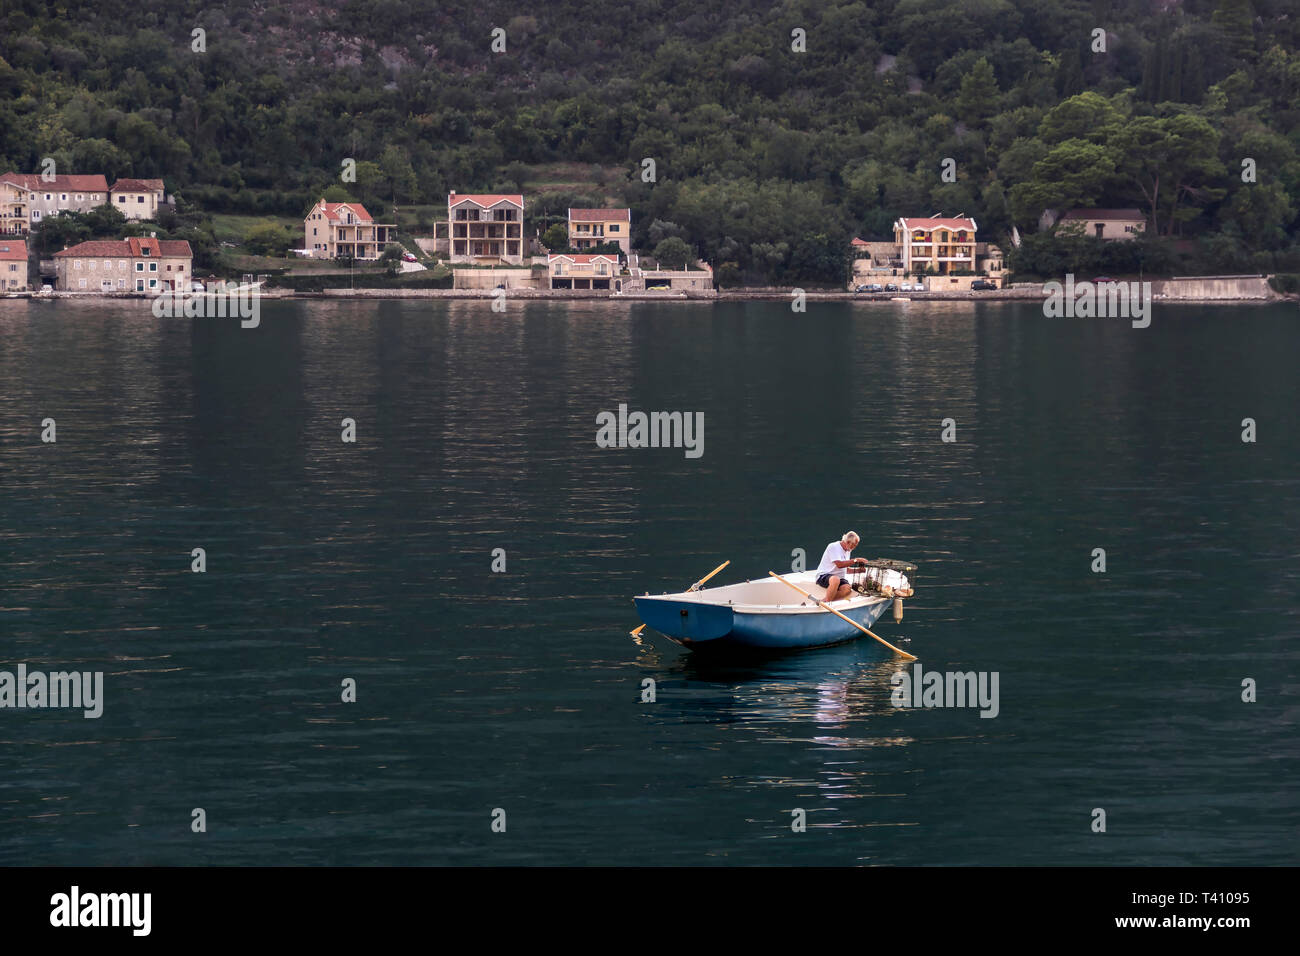 Bay of Kotor, Montenegro, September 19th 2018: Fisherman in a boat setting fish traps Stock Photo